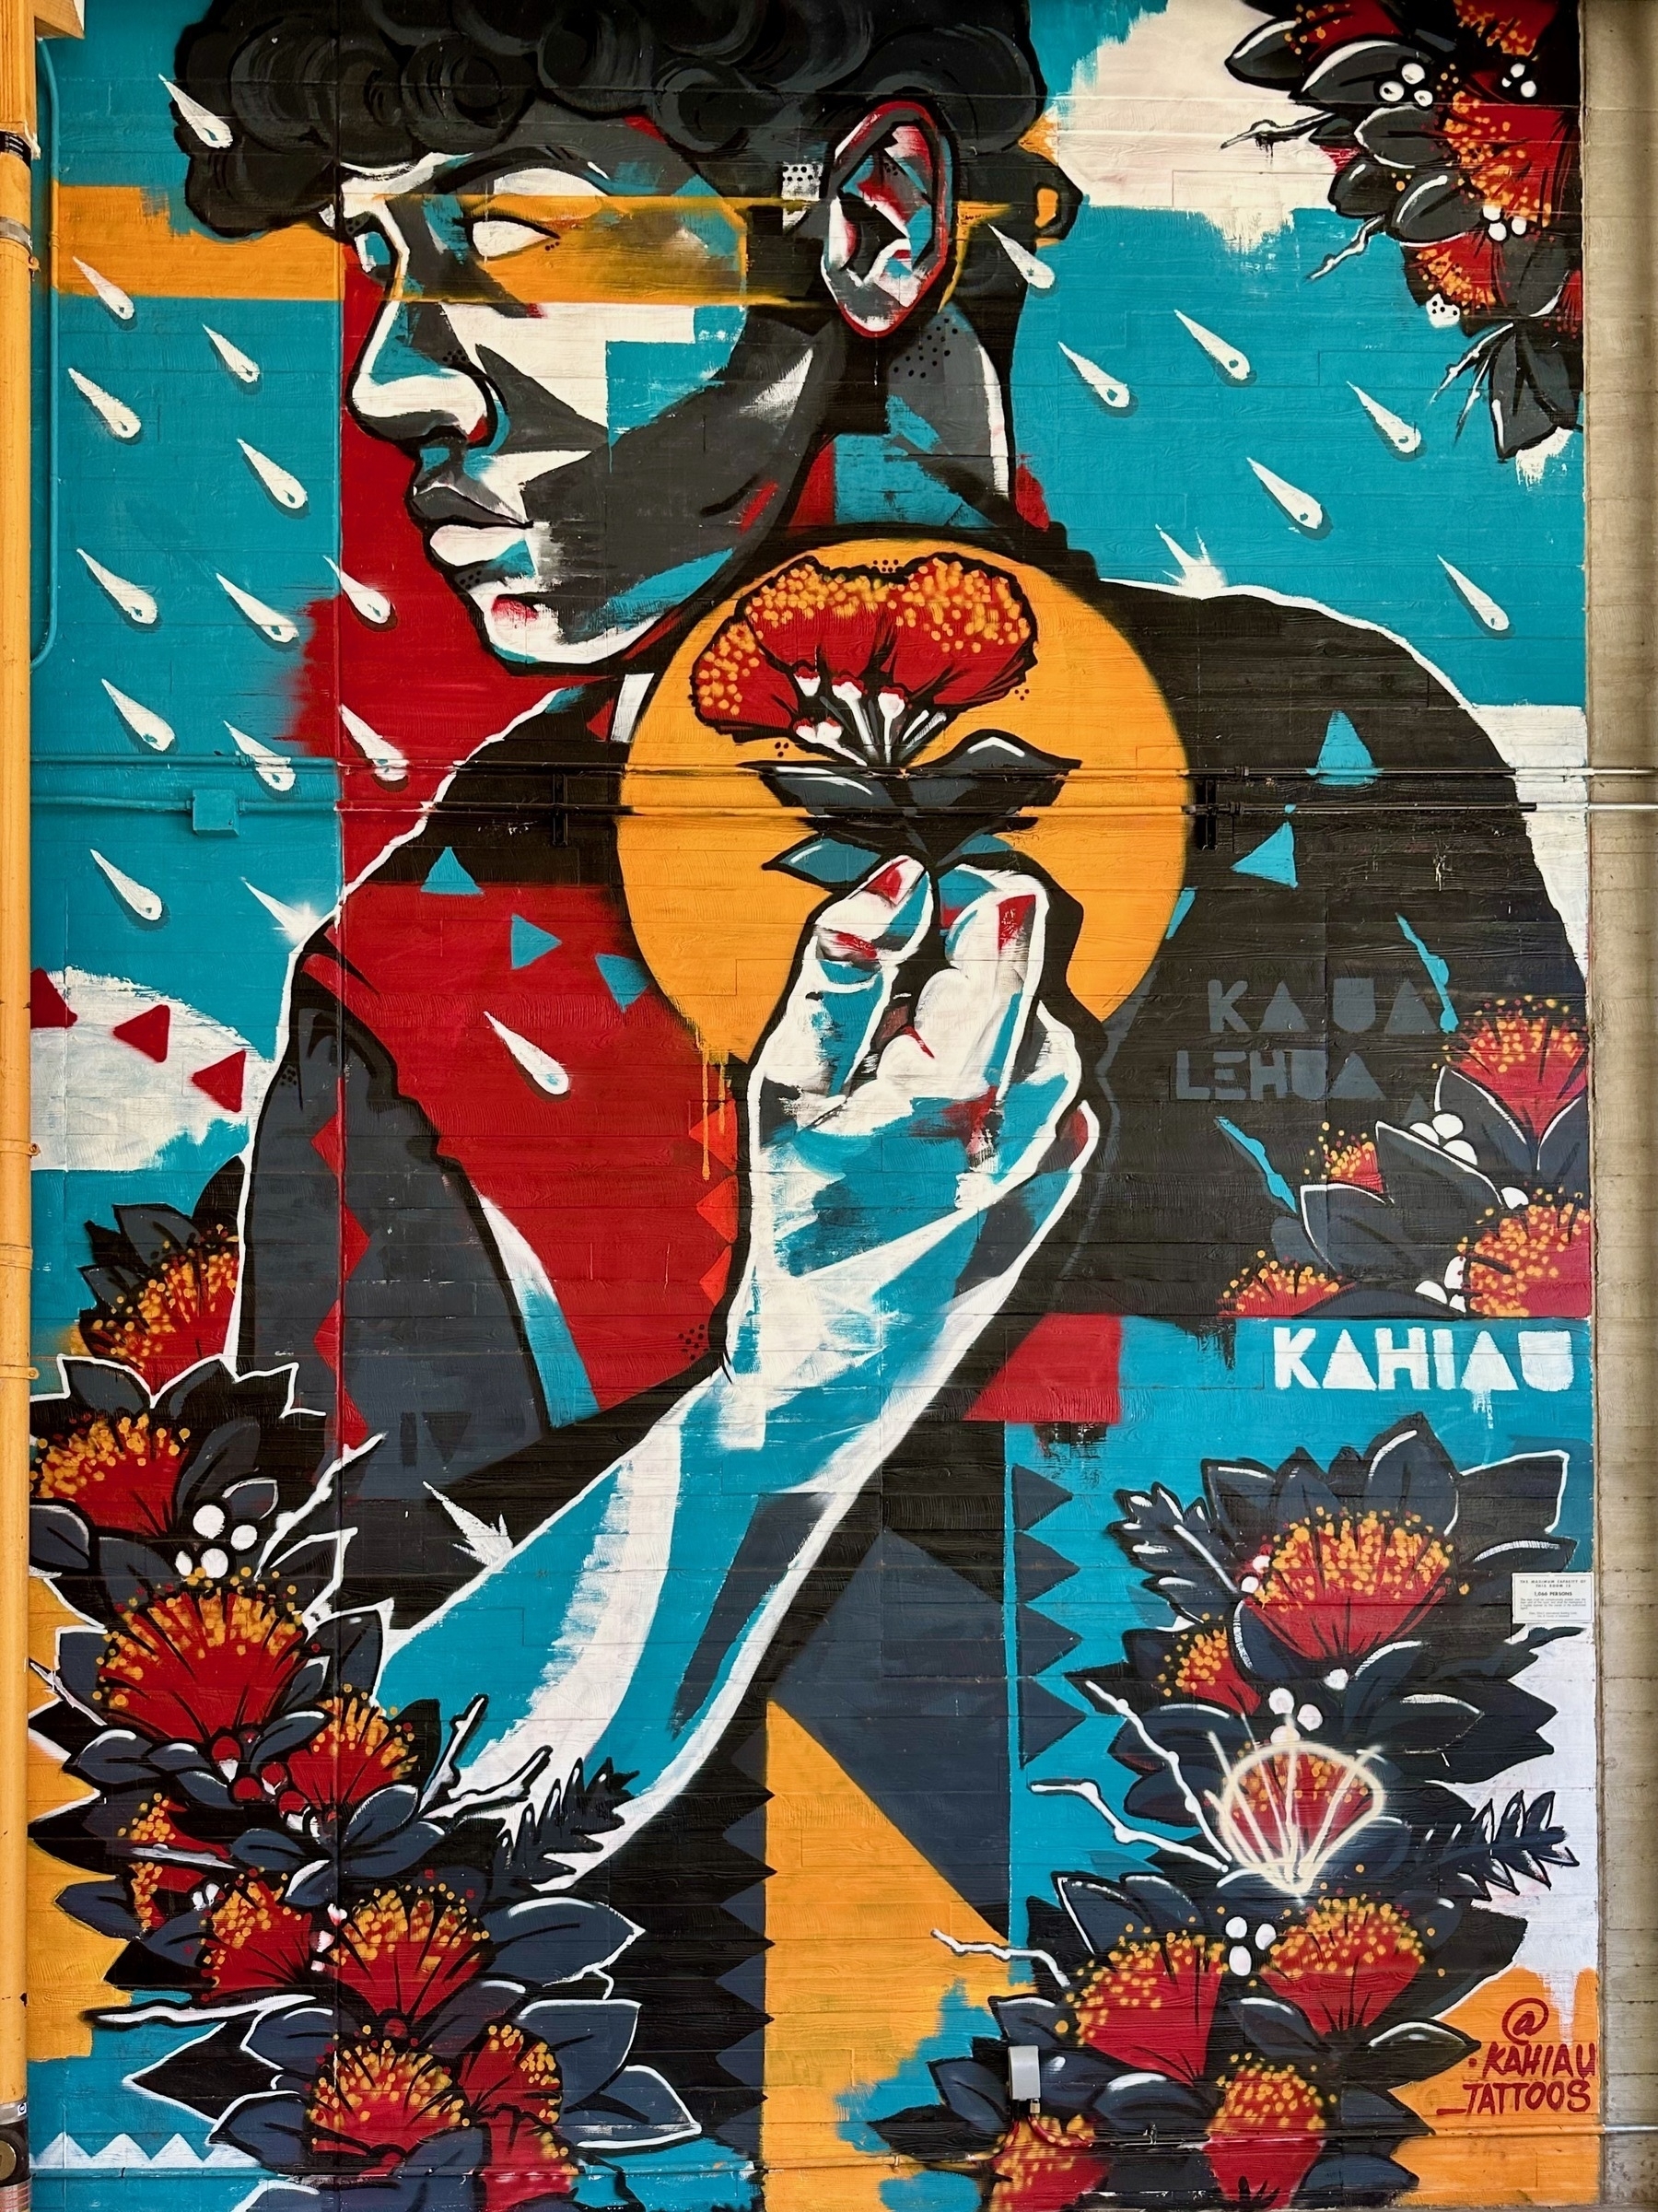 Mural of a young man holding a flower, facing falling raindrops. Made by @kahiau_tattoos.